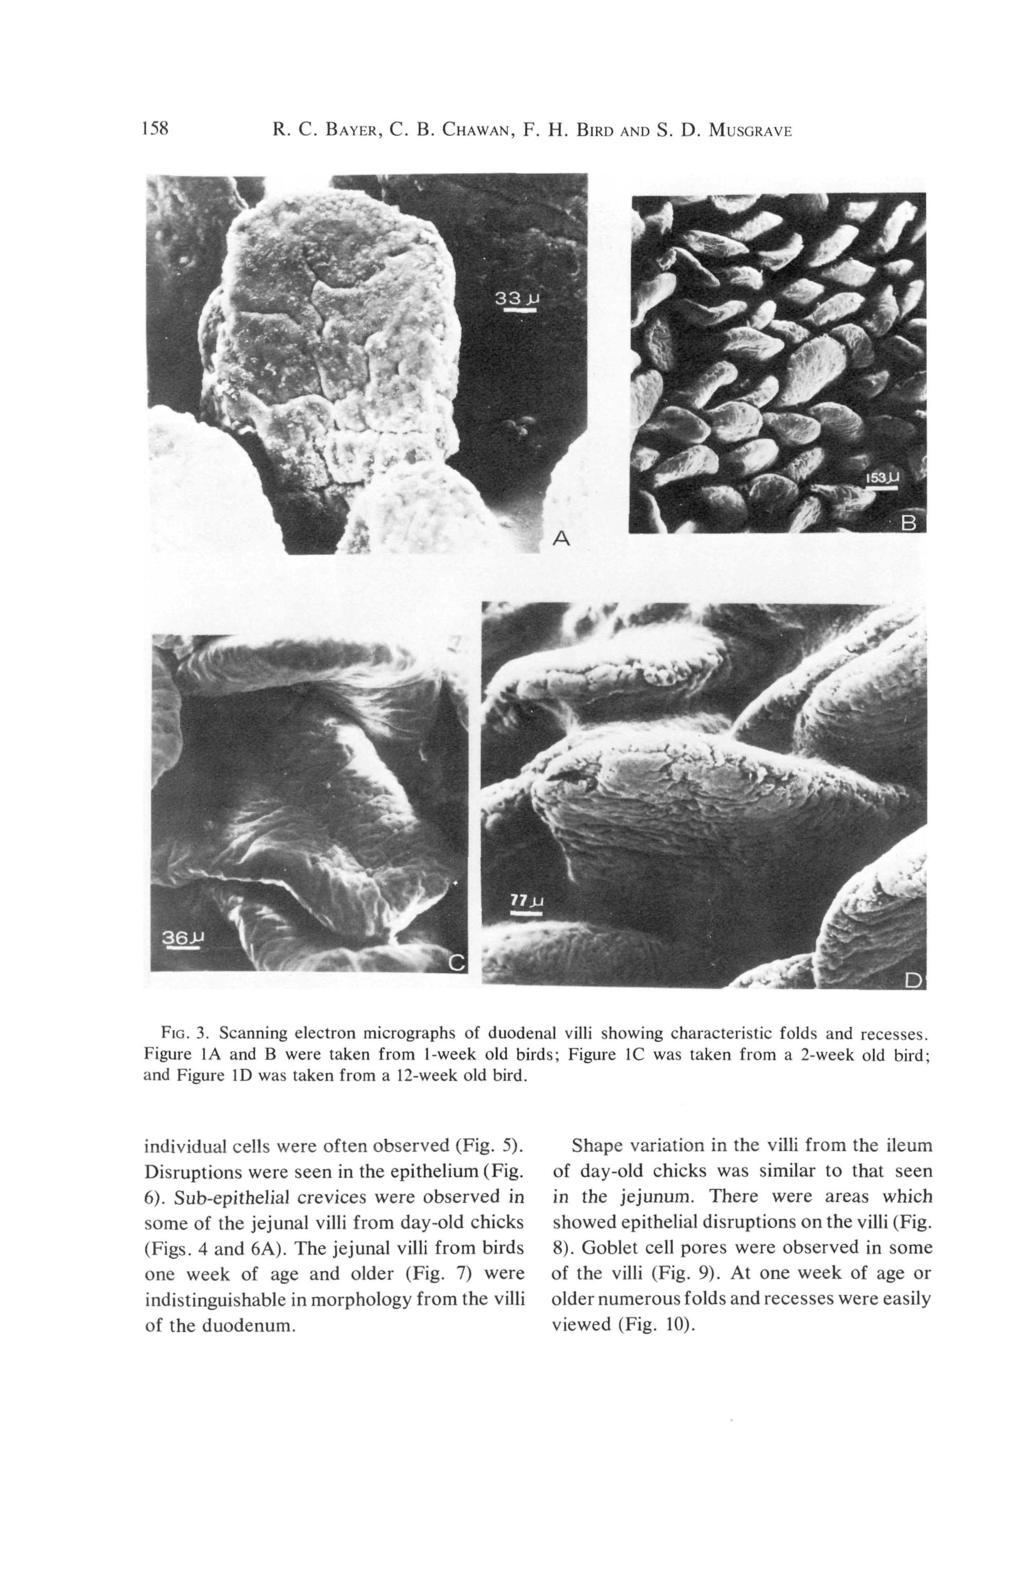 158 R. C. BAYER, C. B. CHAWAN, F. H. BIRD AND S. D. MUSGRAVE FIG. 3. Scanning electron micrographs of duodenal villi showing characteristic folds and recesses.